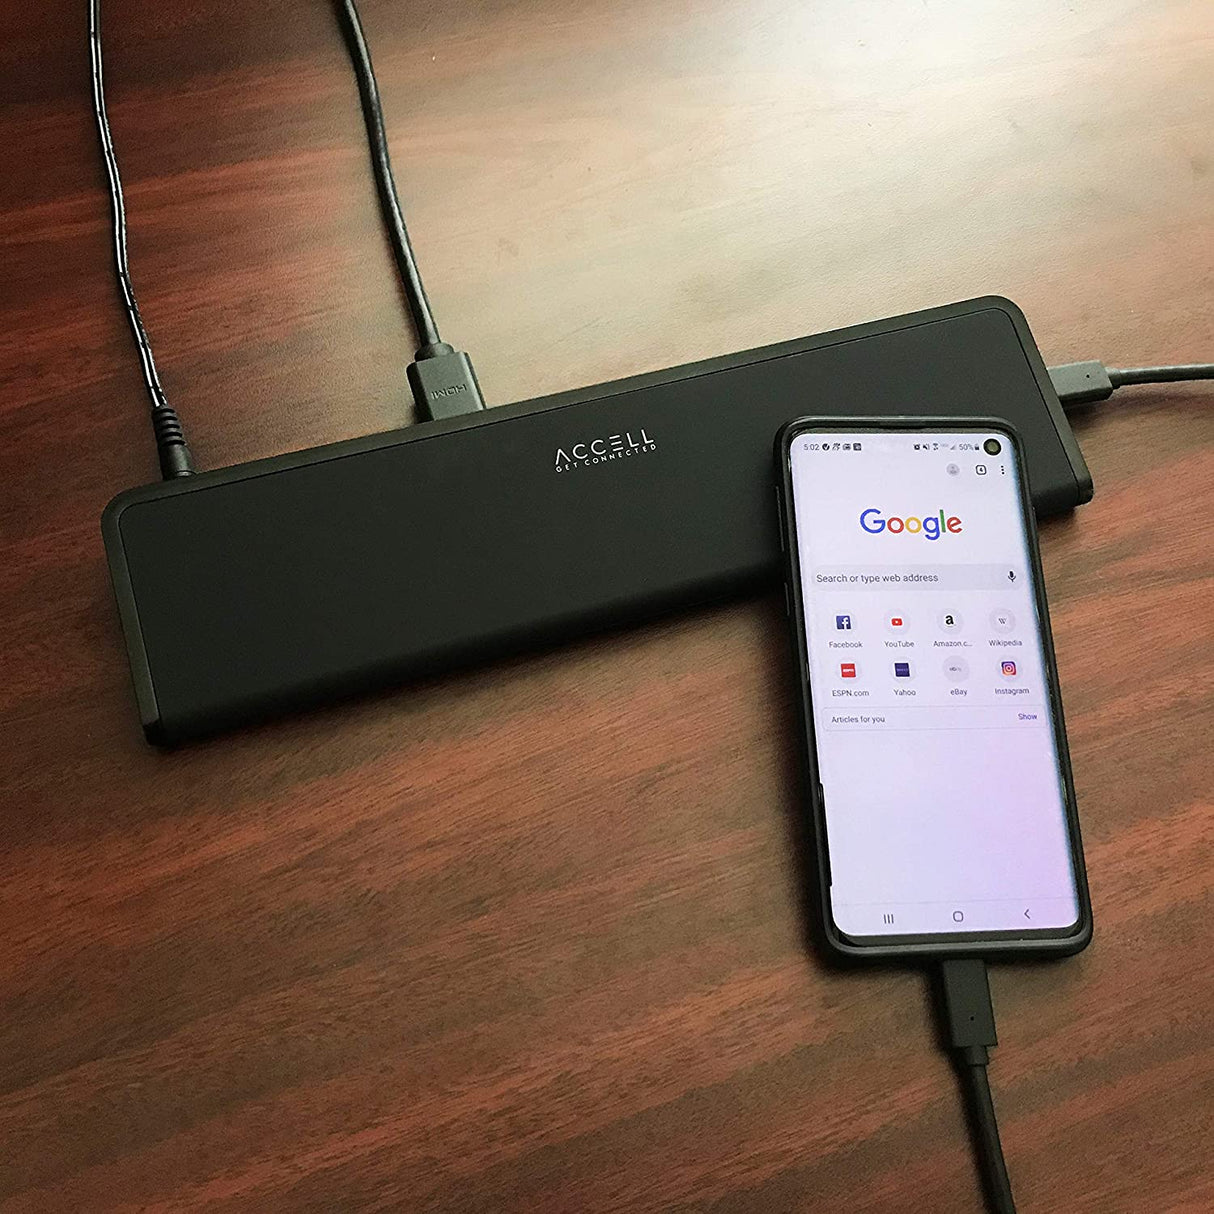 Accell InstantView USB-C 4K Docking Station - 2 HDMI, 3x USB-A 3.1, Ethernet, Audio Ports Compatible with PC, macOS, Android, Chromebook, (K31G2-001B) - Dealtargets.com